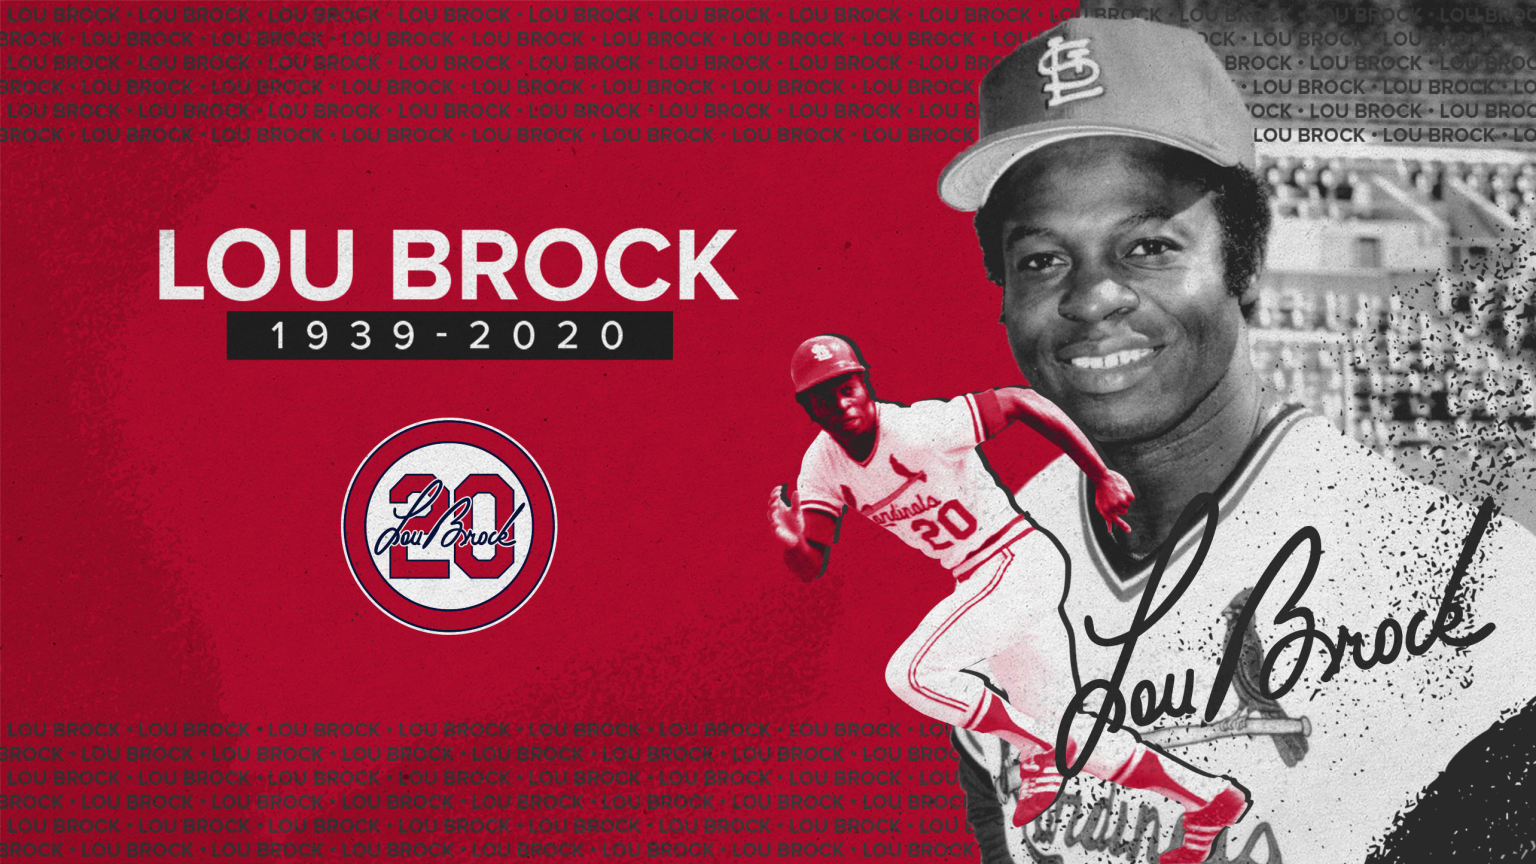 Lou Brock Overview